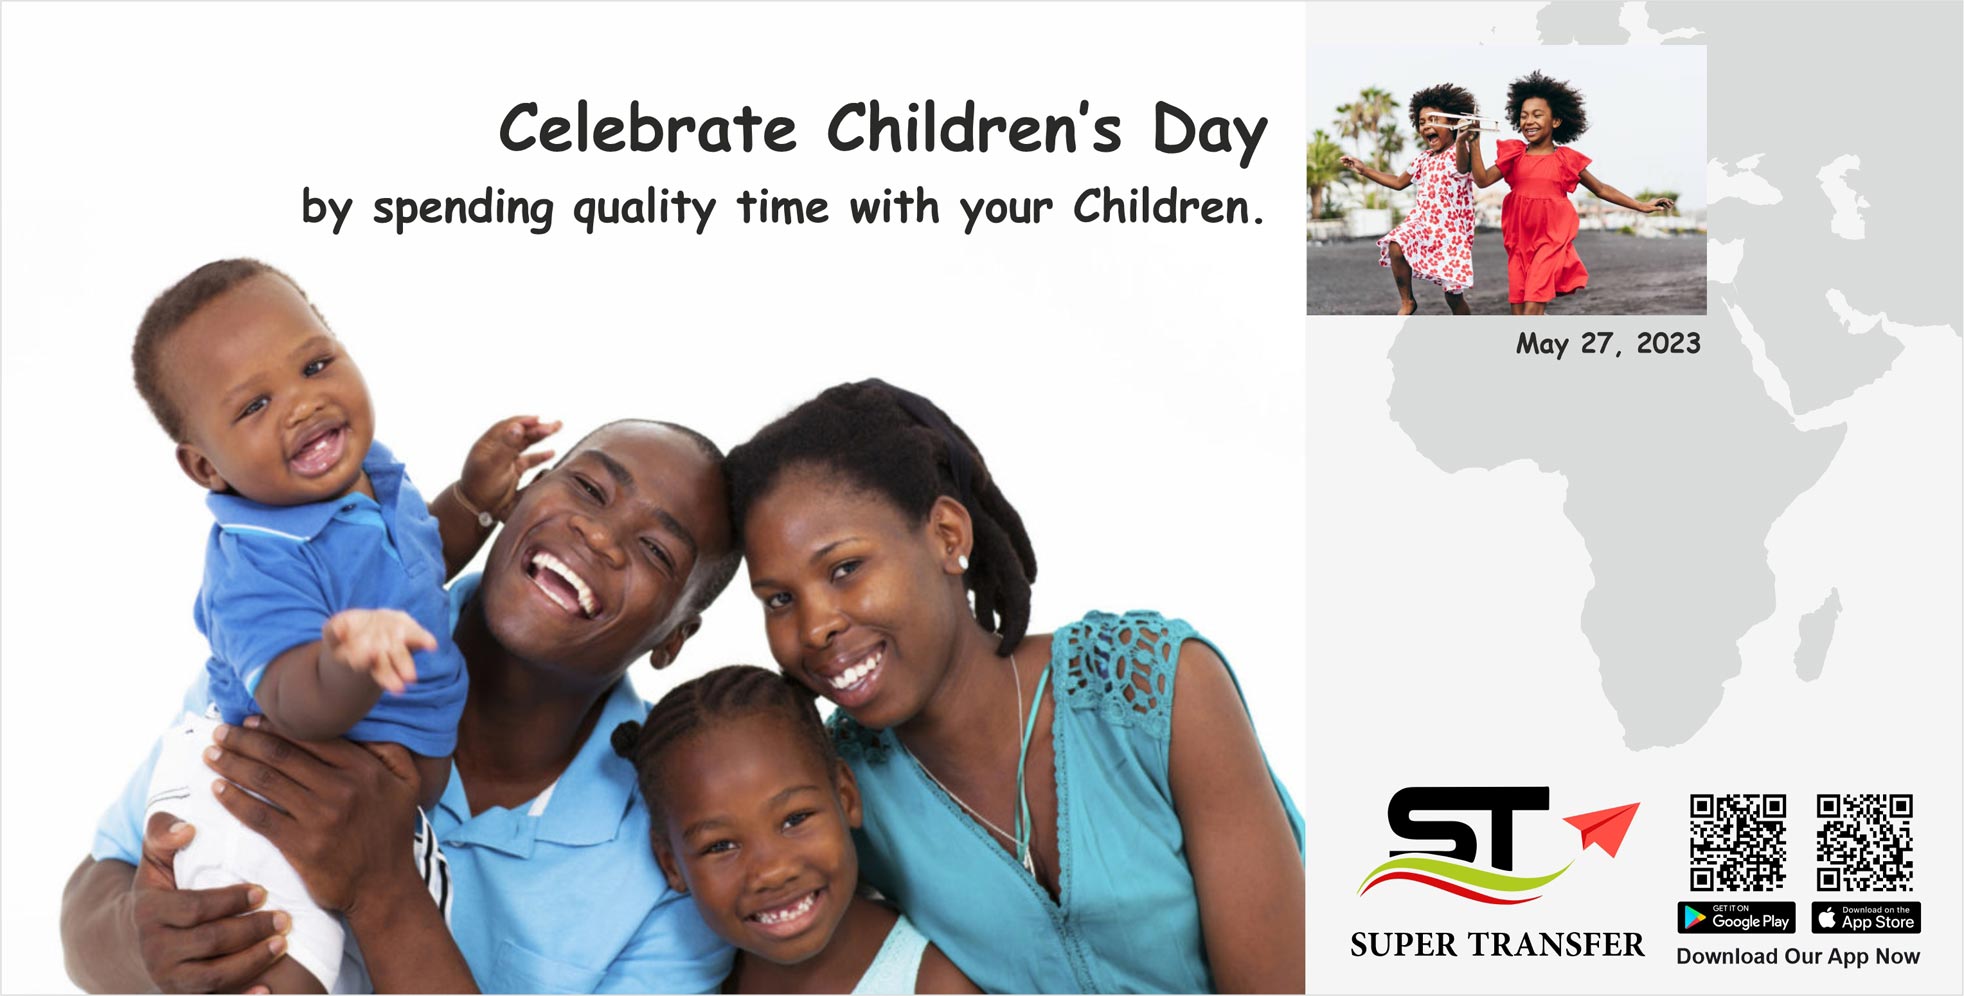 Celebrate Children's Day by spending quality time with your Children